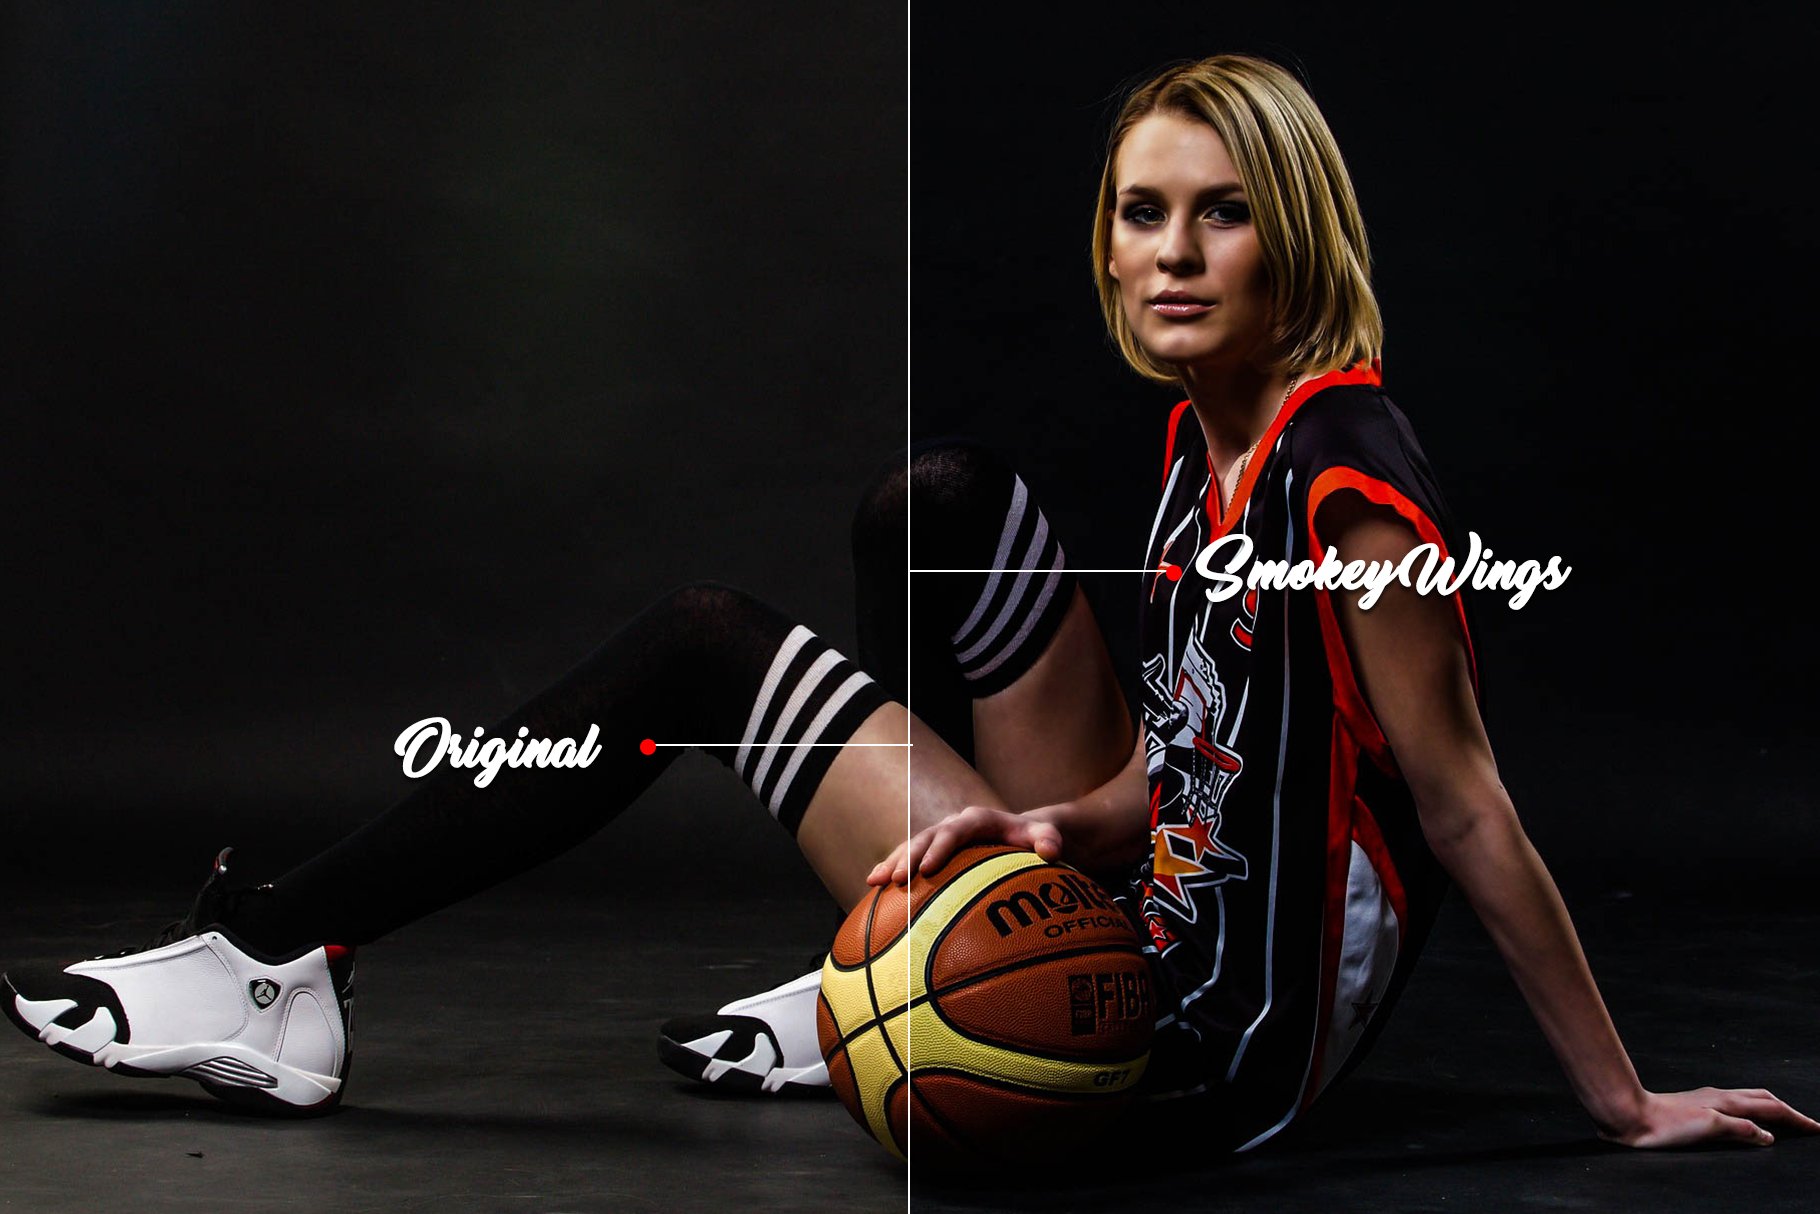 sports lightroom and photoshop presets by pixelspic illustrative image smokey wings 777